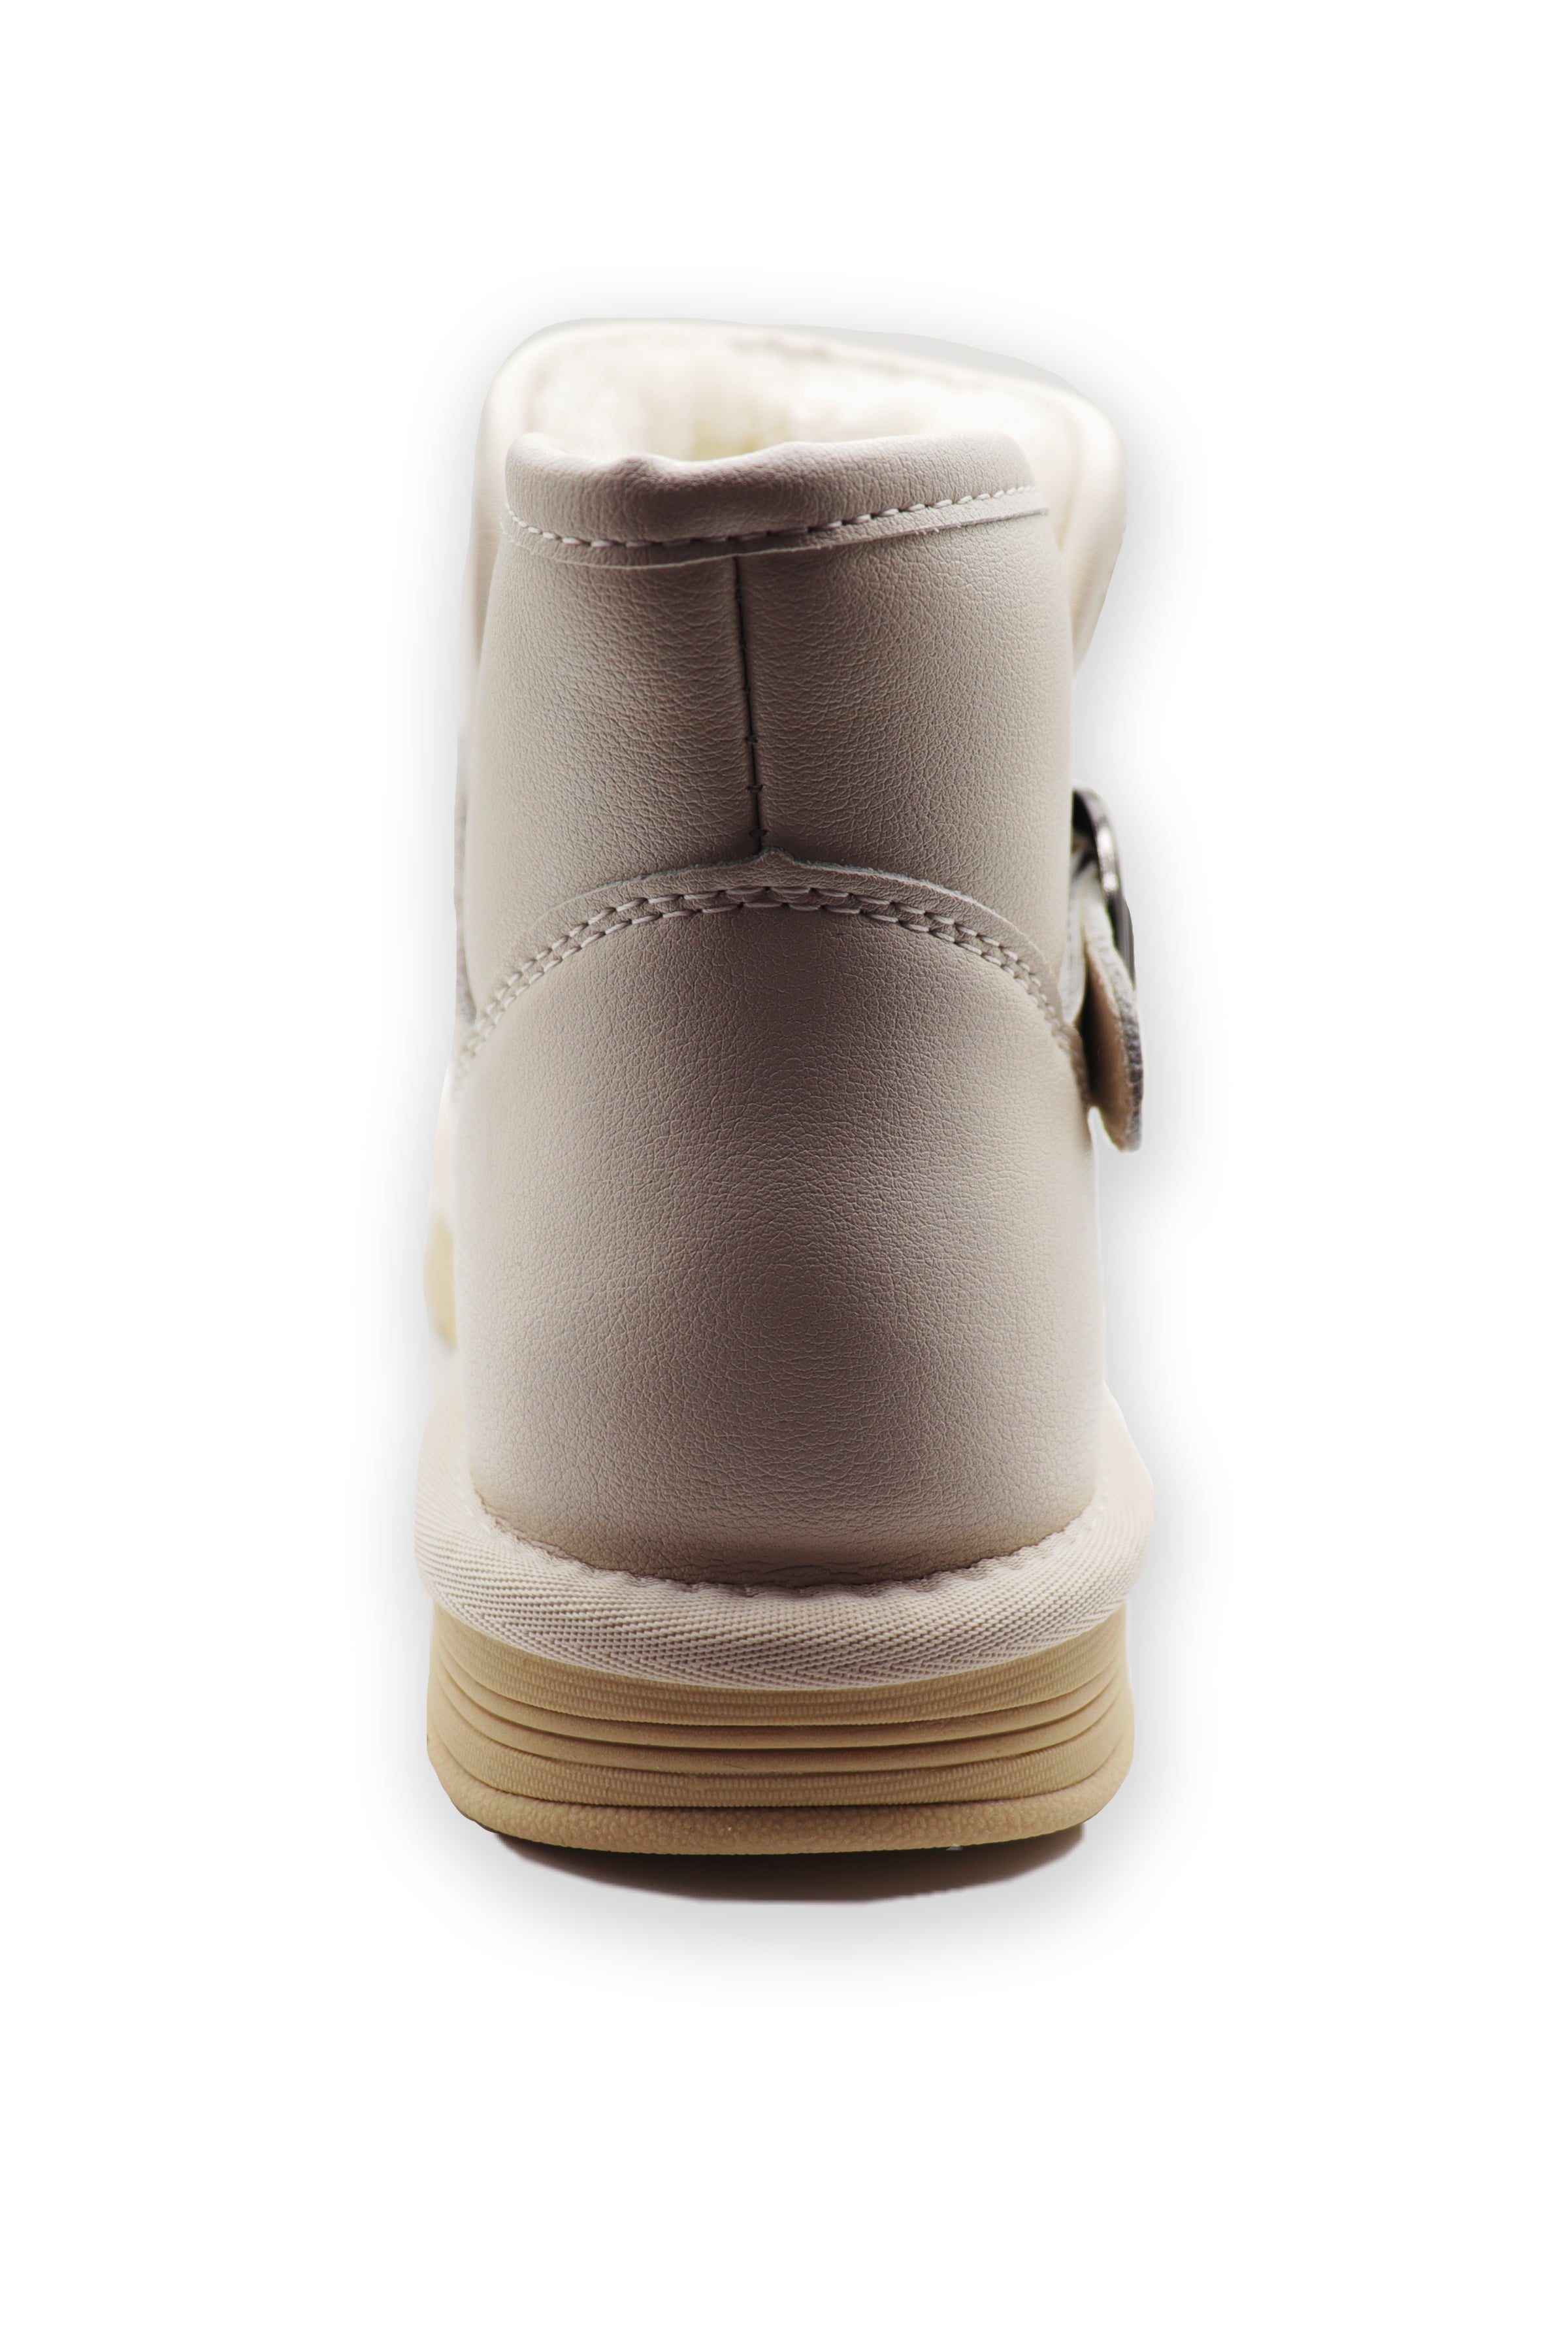 Women's White Imitation Cashmere And Leather Metal Button Snow Boots